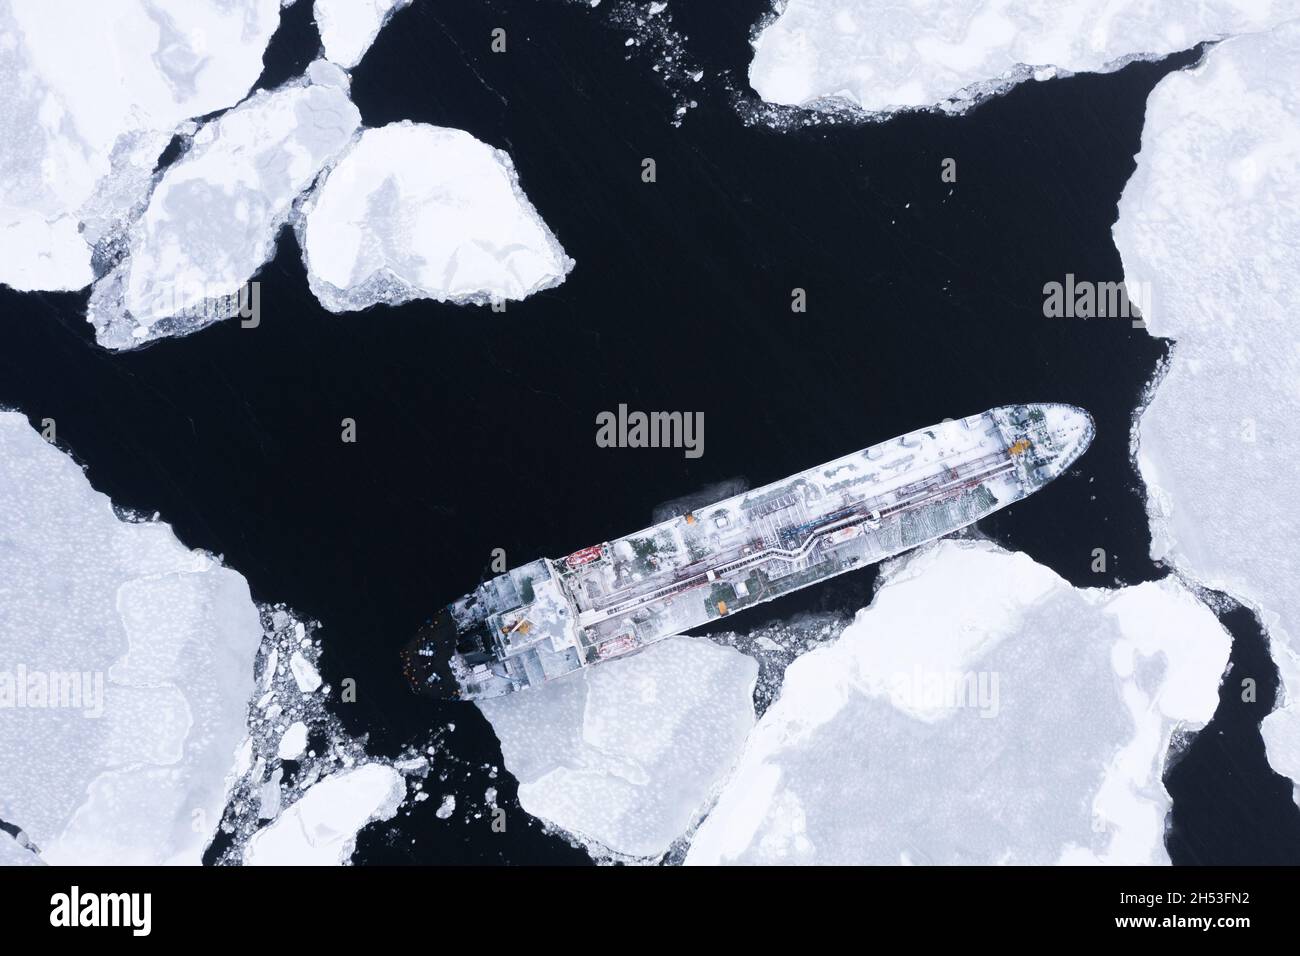 The ship is in the sea among the ice. Stock Photo